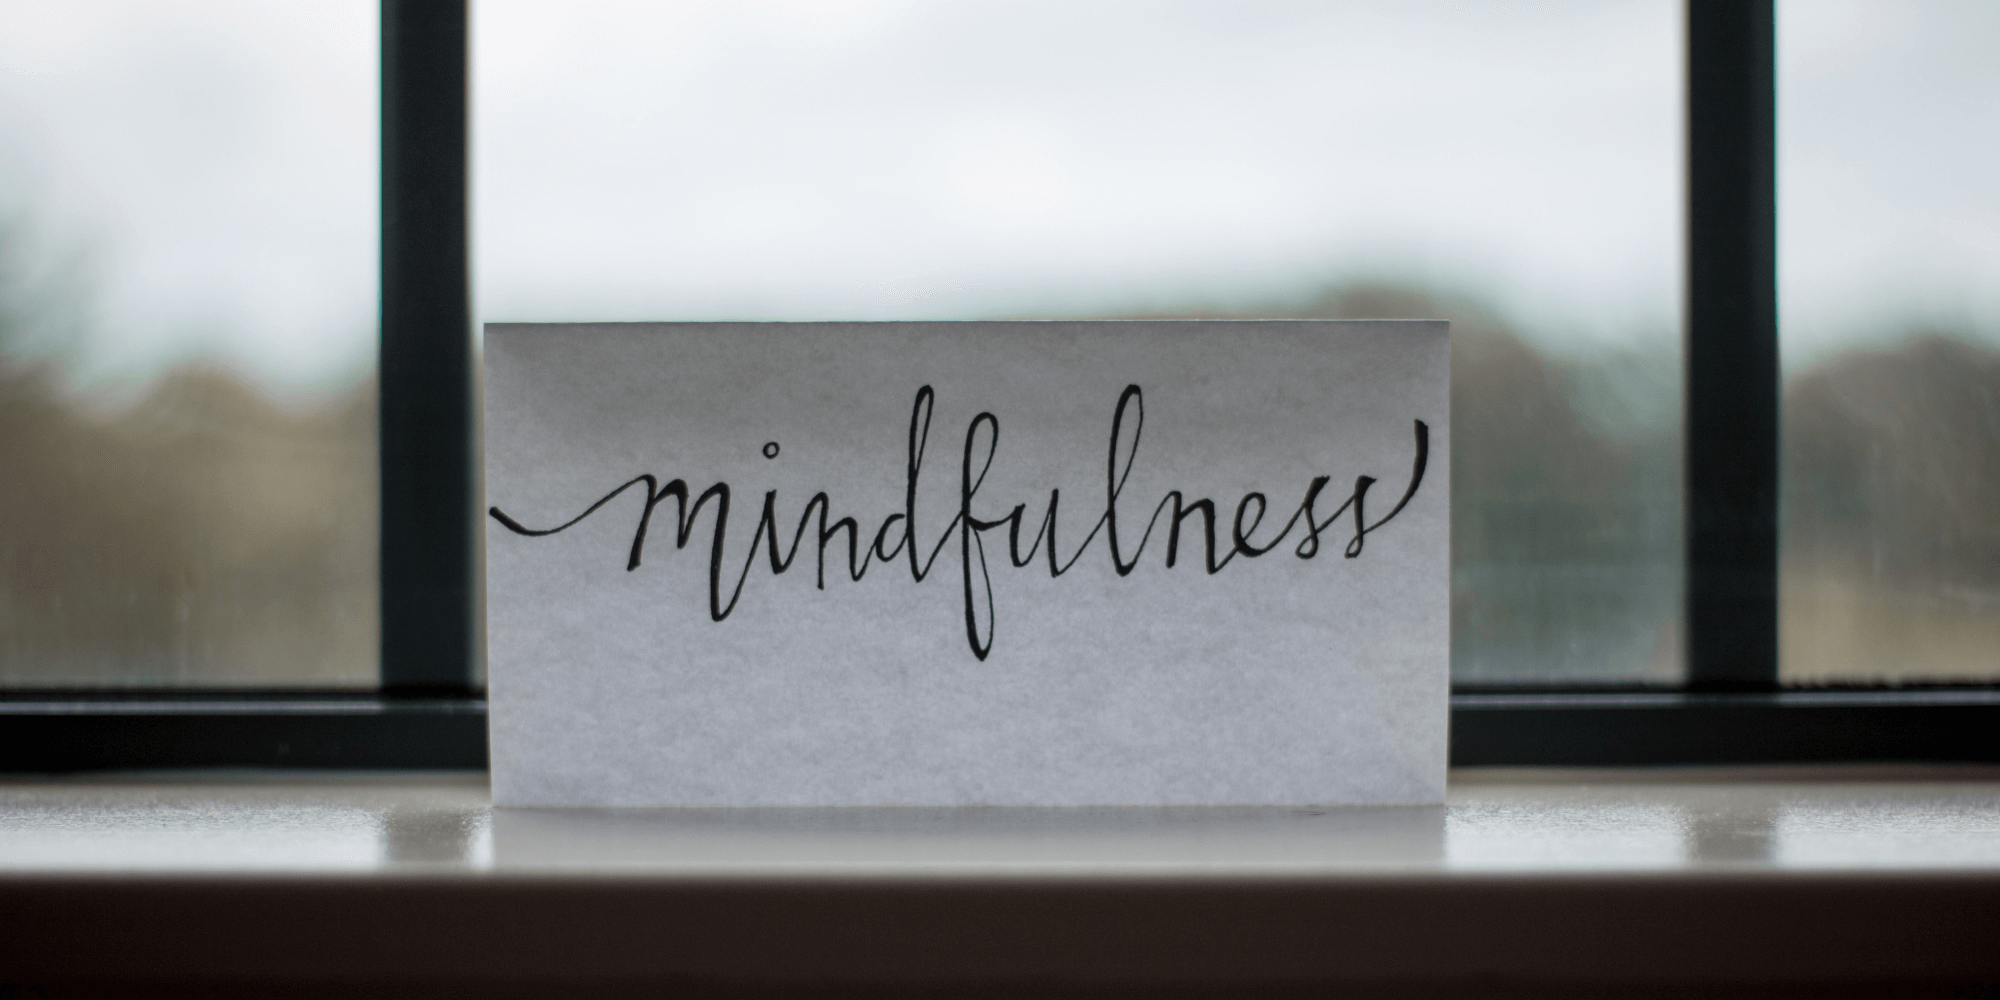 Mindfulness can silence the mind